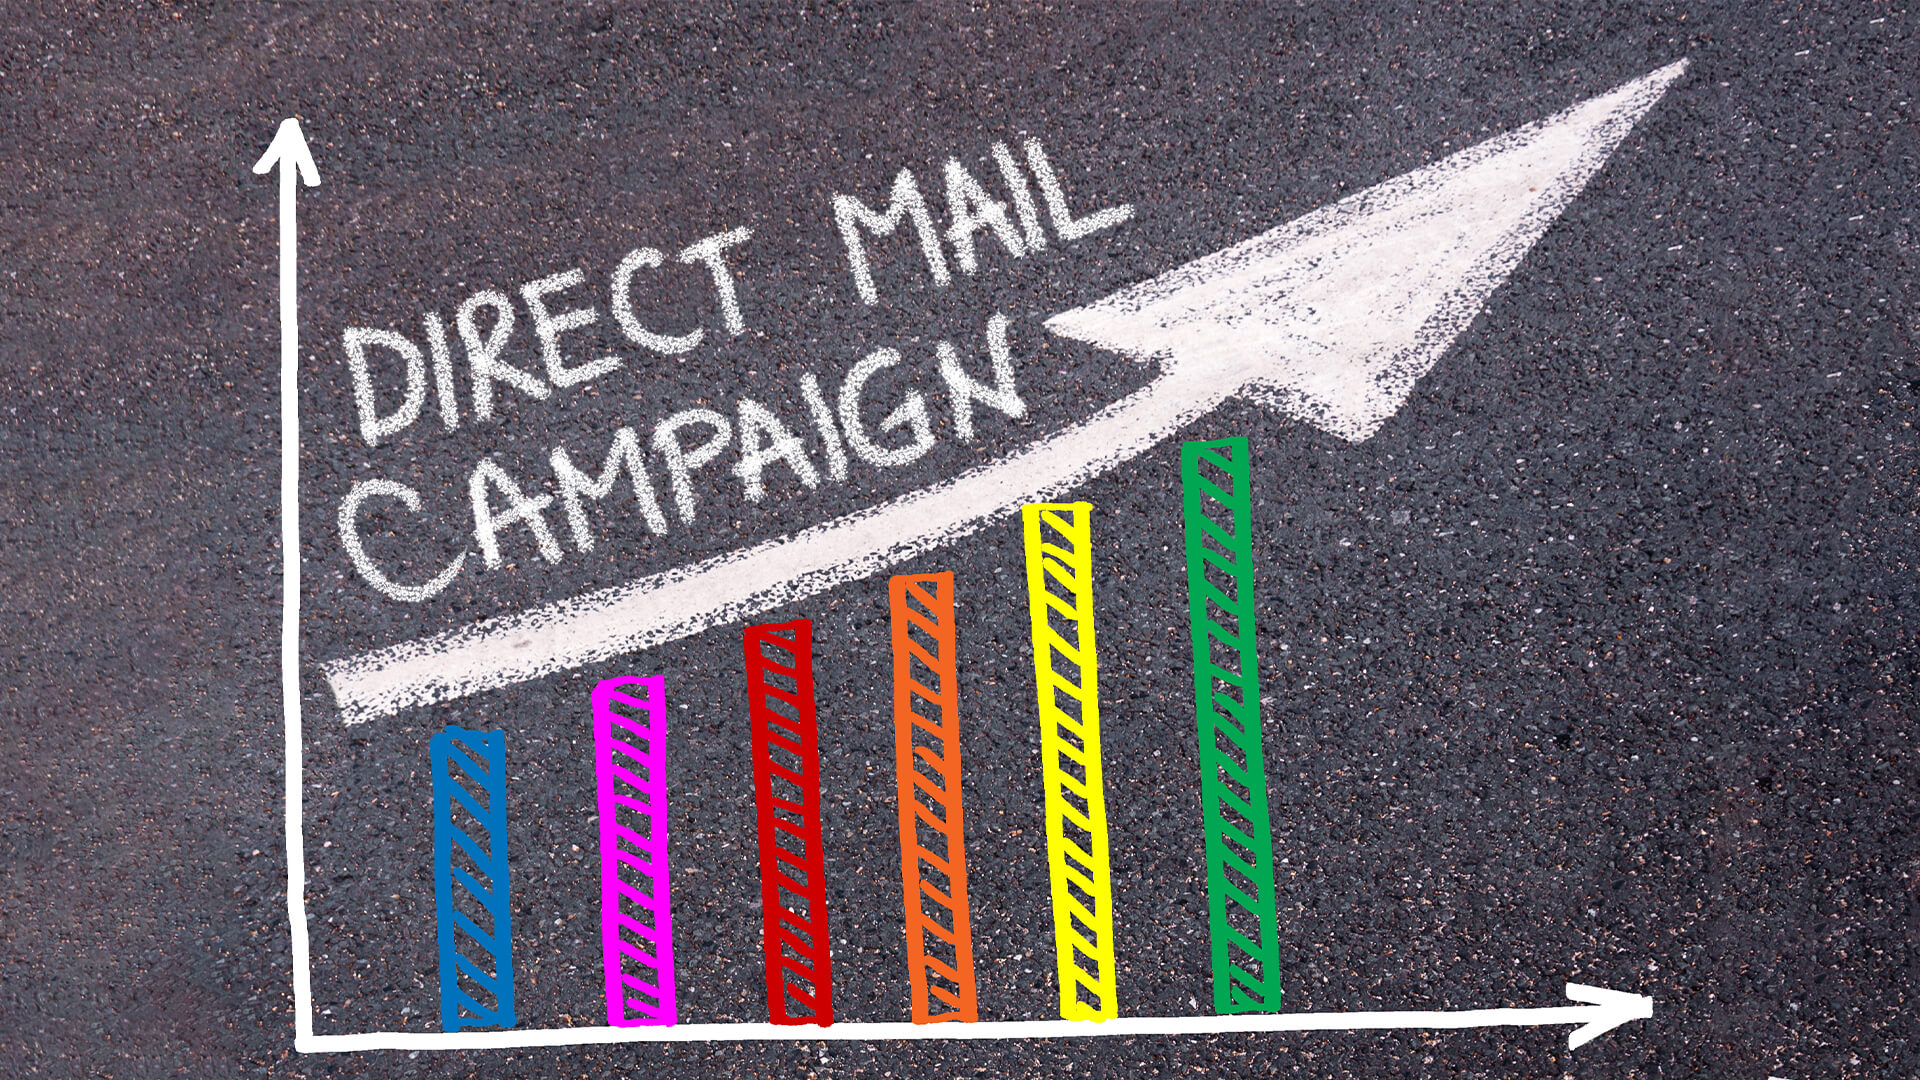 DIRECT MAIL CAMPAIGN written over colorful graph and rising arrow